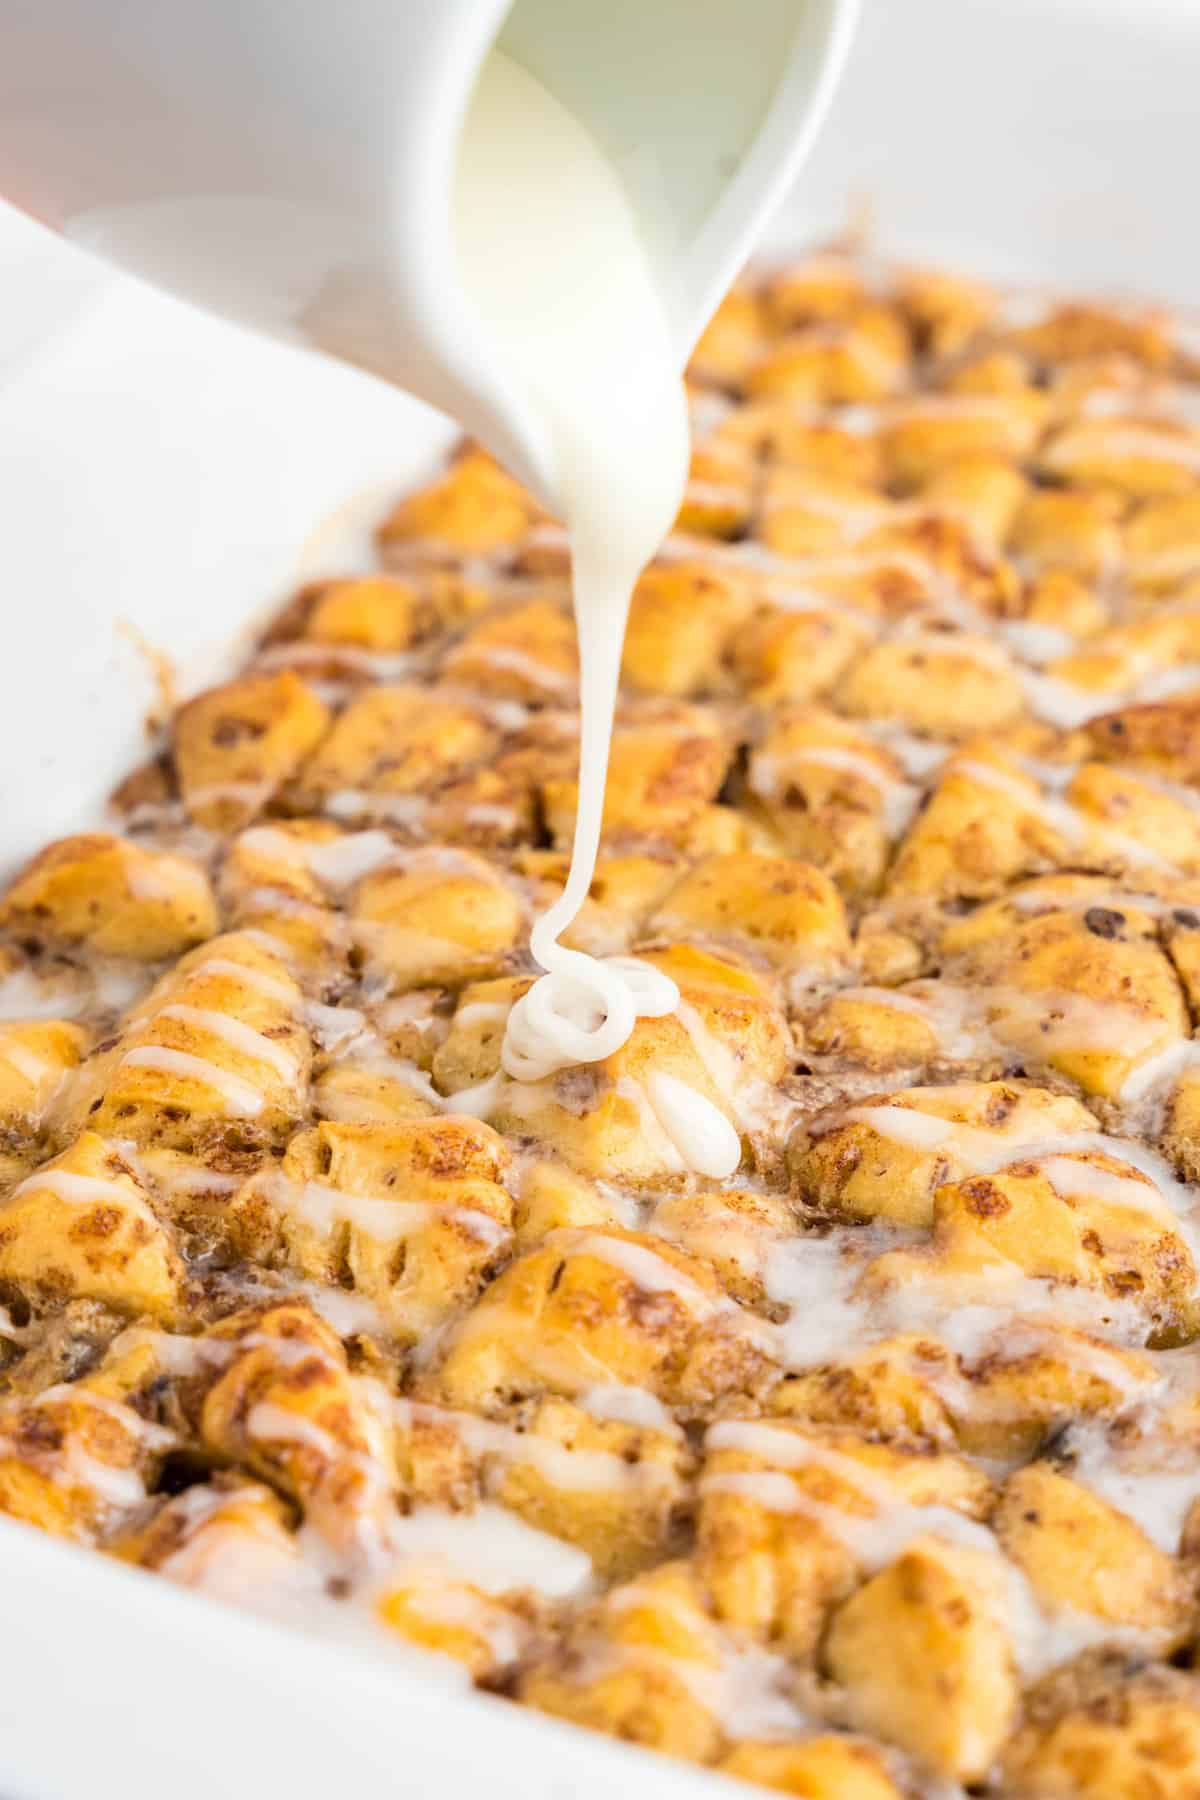 Pouring frosting over Cinnamon Roll Casserole in baking dish